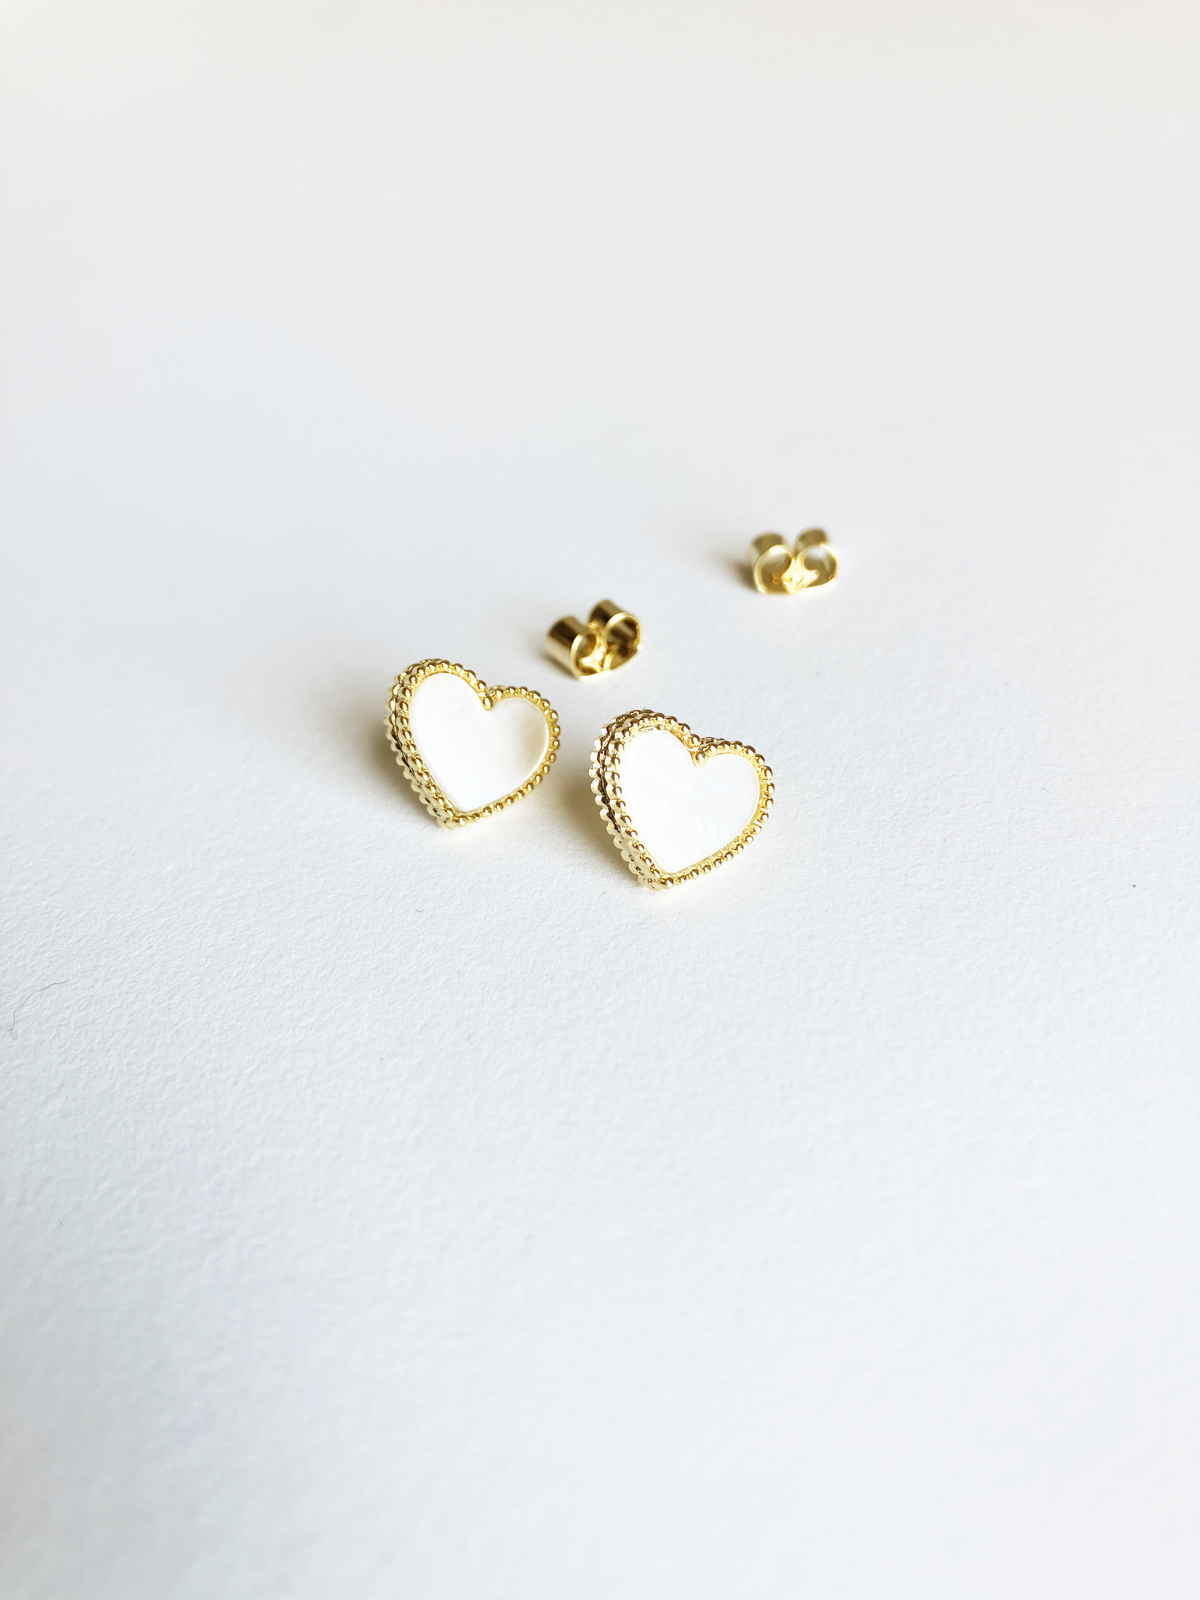 Primary image for Mother of Pearl Darling Earrings in Gold